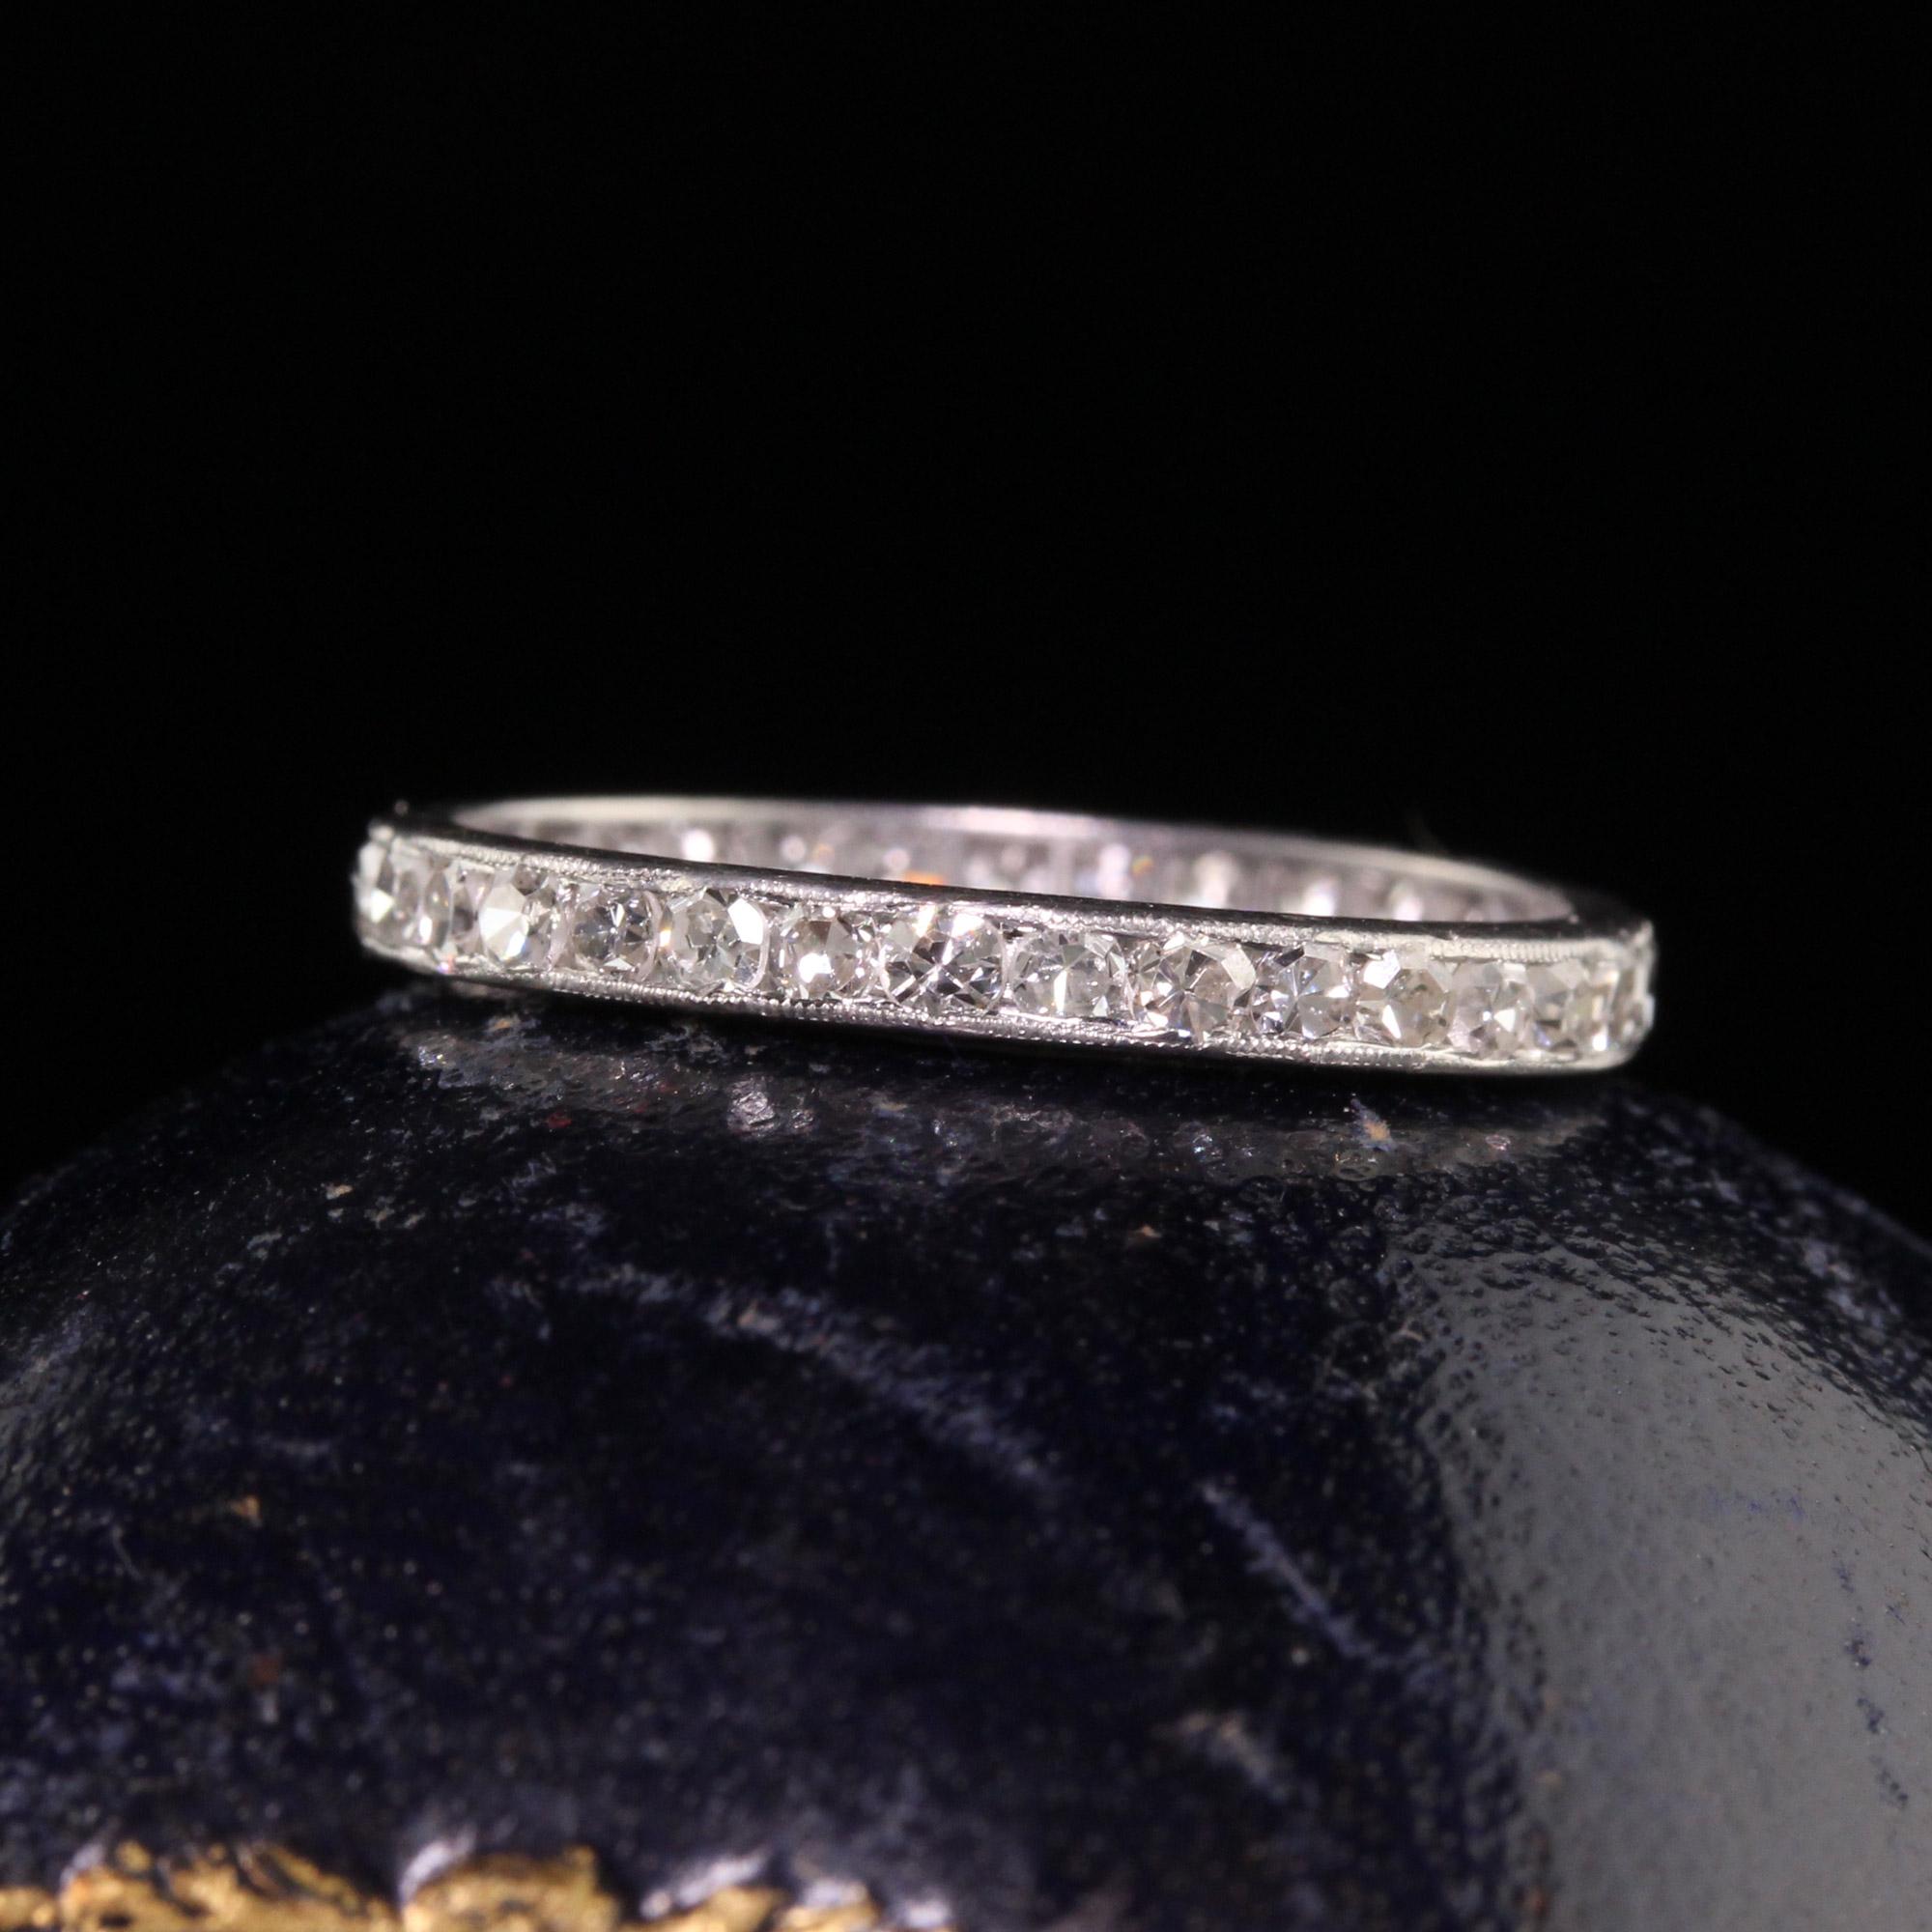 Beautiful Antique Art Deco Platinum Single Cut Diamond Wedding Eternity Band - Size 5 1/2. This incredible wedding band is crafted in platinum. There are single cut diamonds going around the entire ring and has milgrain on the edges of the channels.